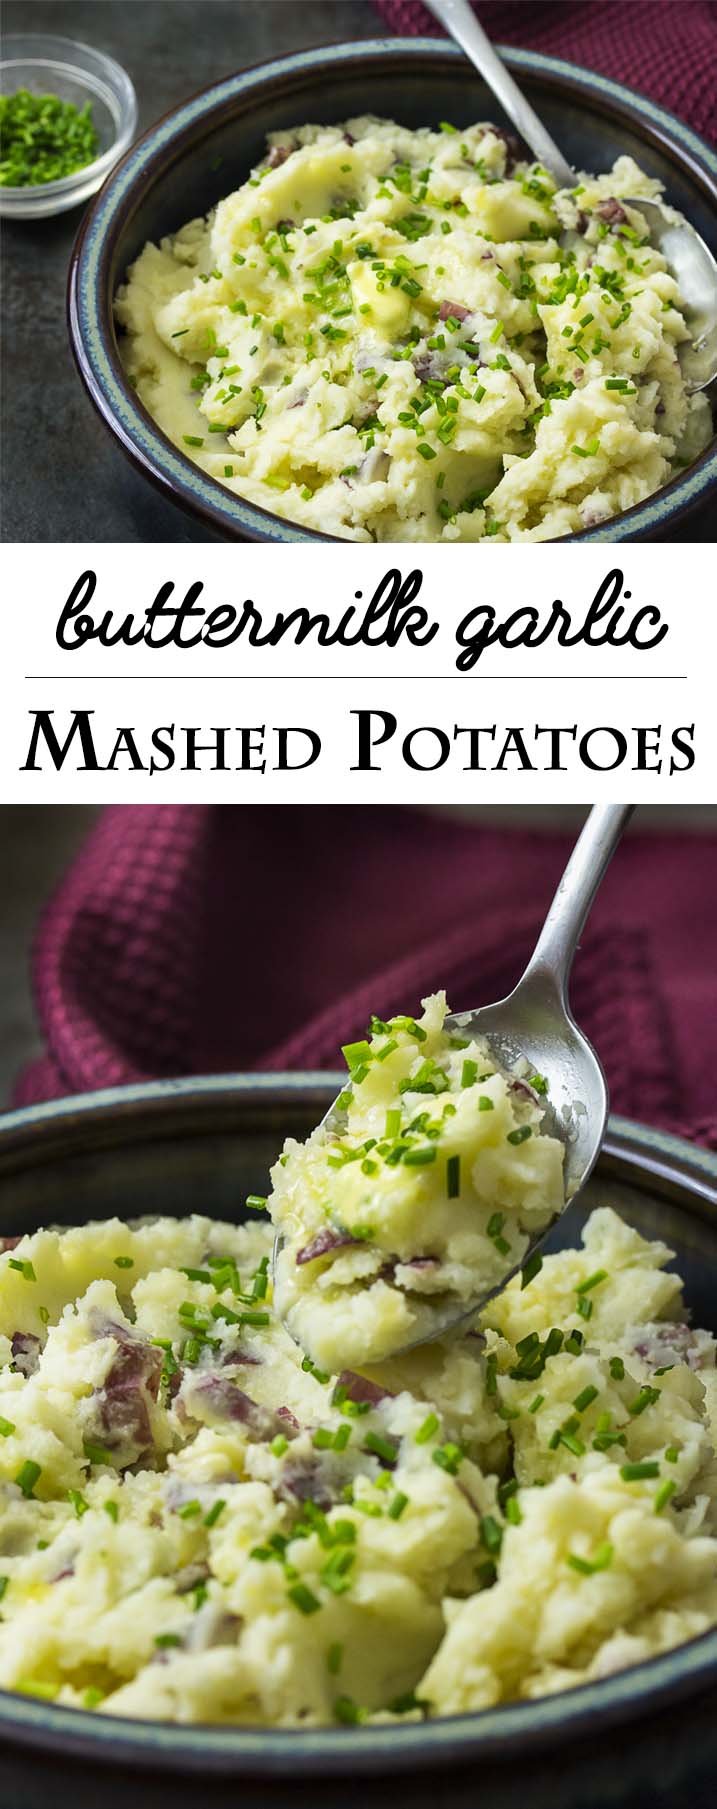 This recipe for creamy buttermilk garlic mashed potatoes topped with chives is super easy comfort food great for holidays or any day. | justalittlebitofbacon.com